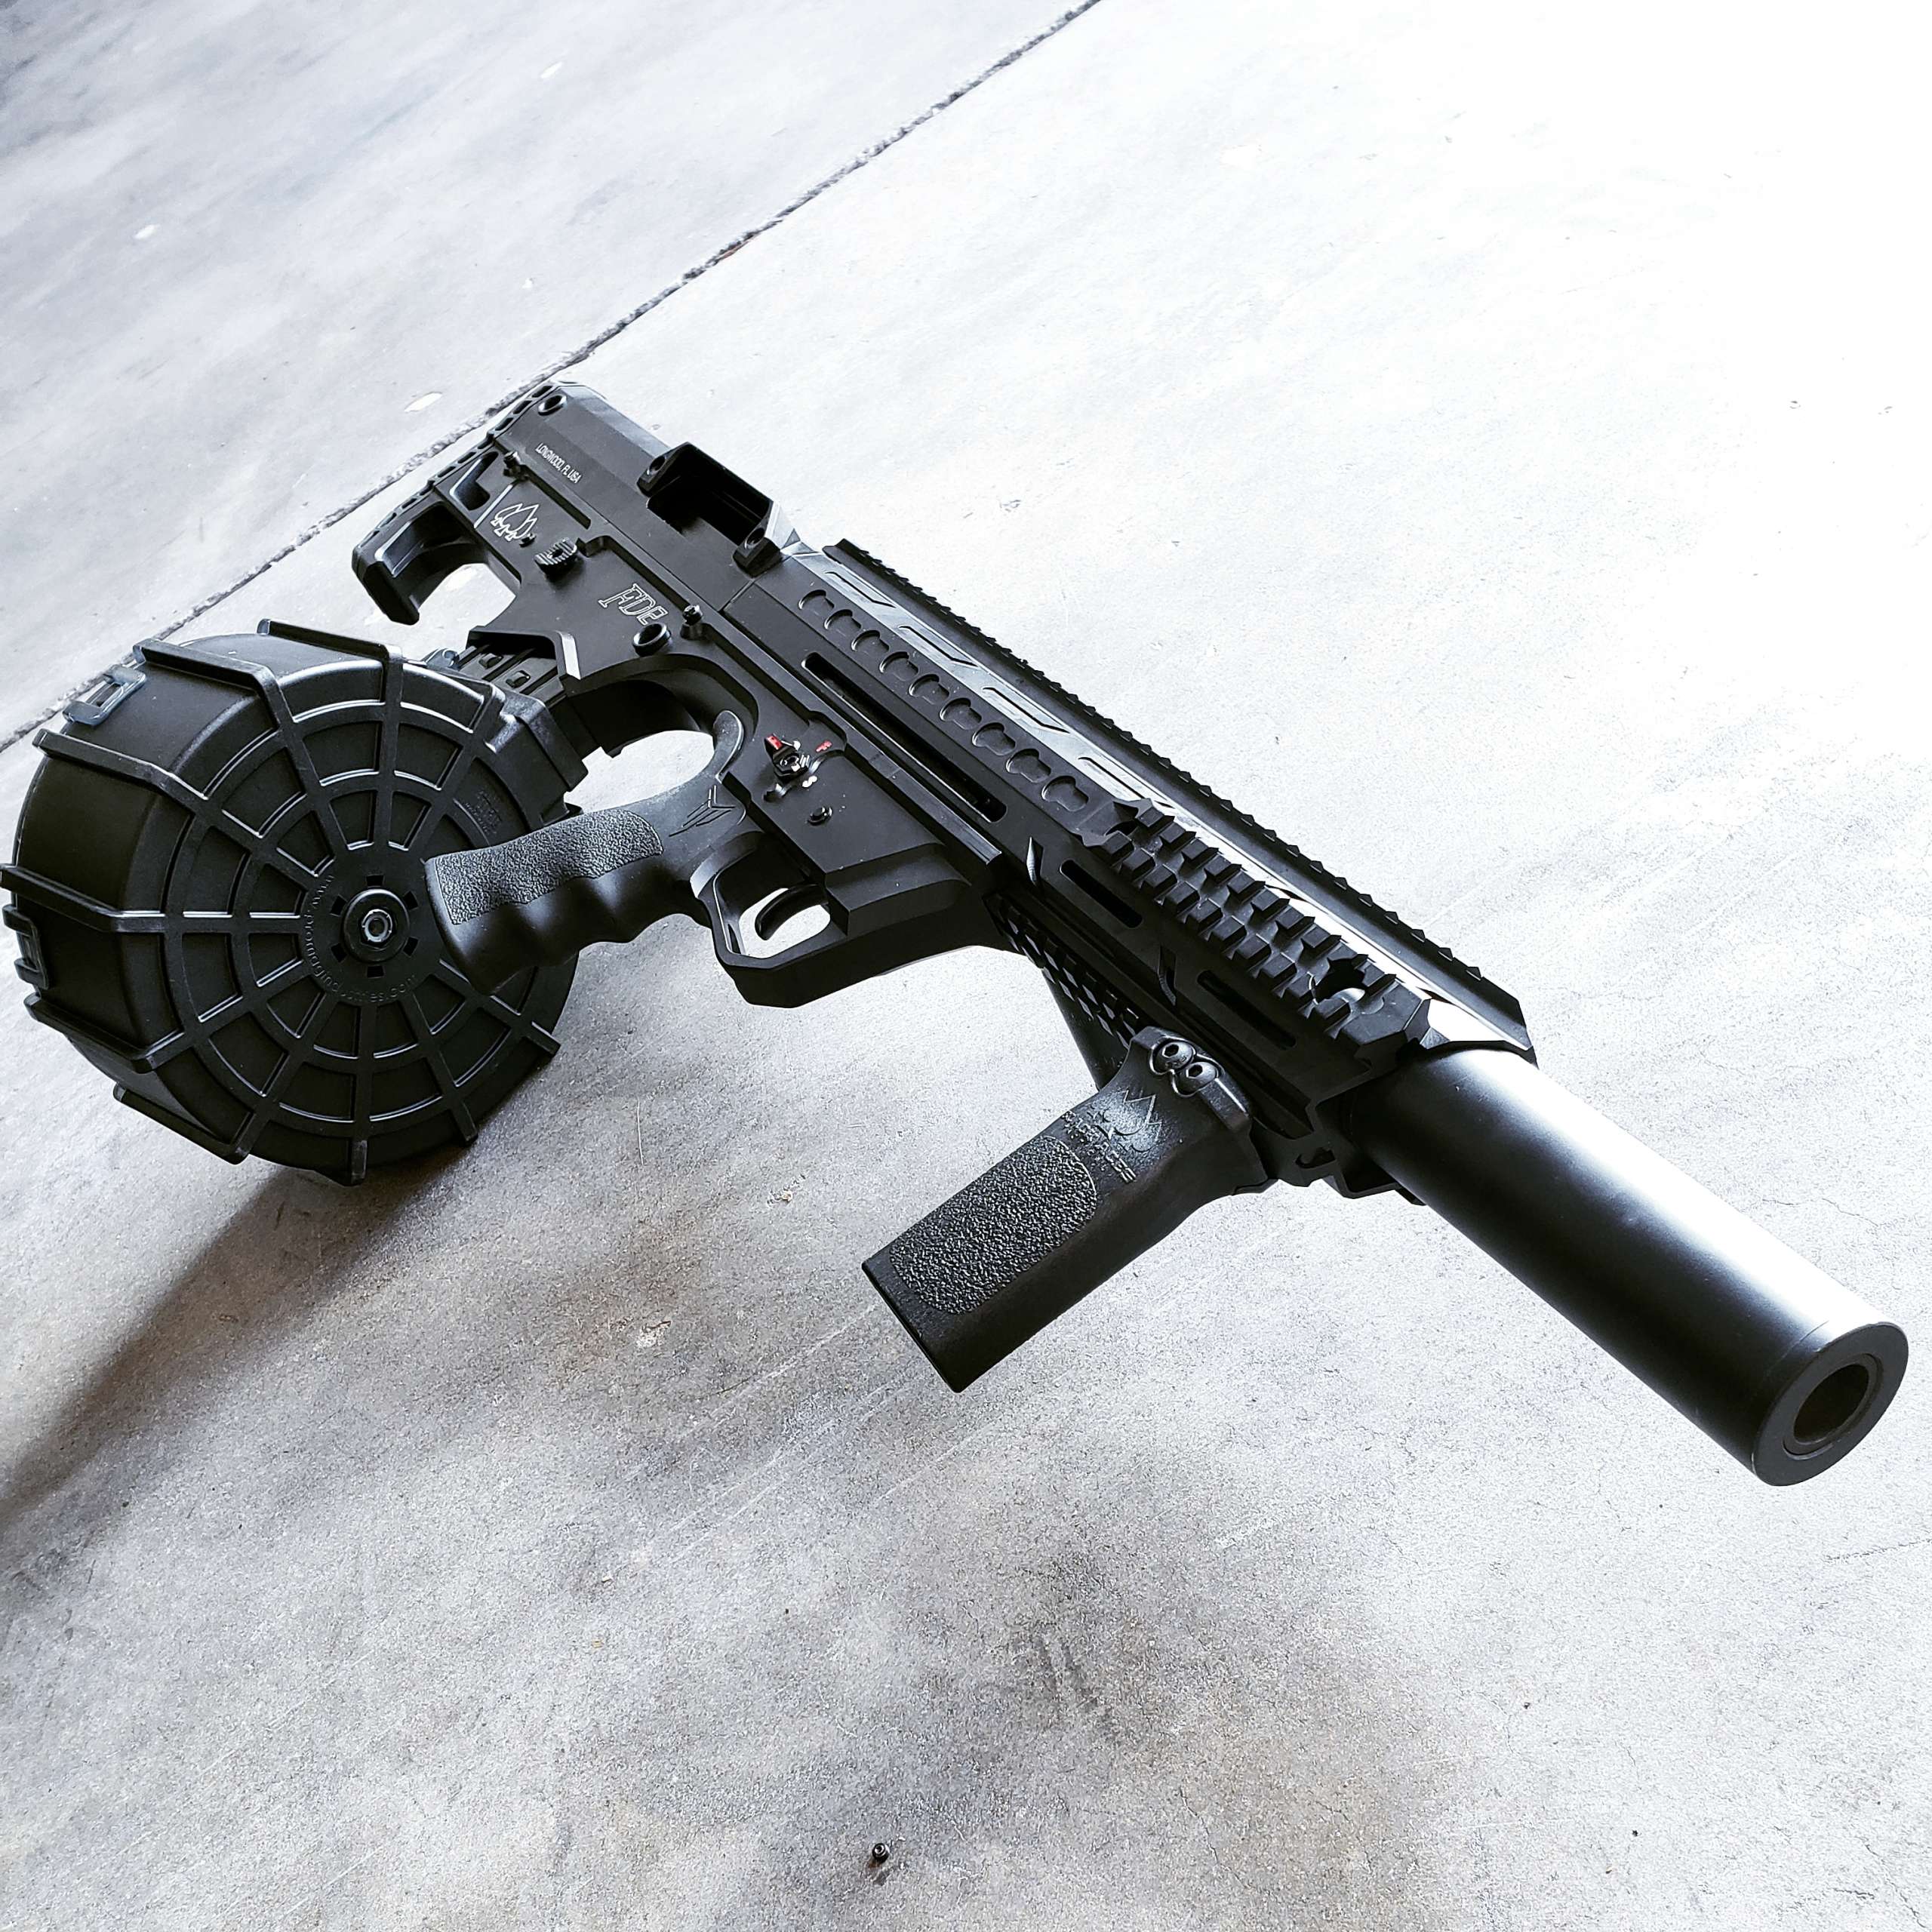 Pro Series Bullpup (Semiautomatic) in Black + 20 round drum.